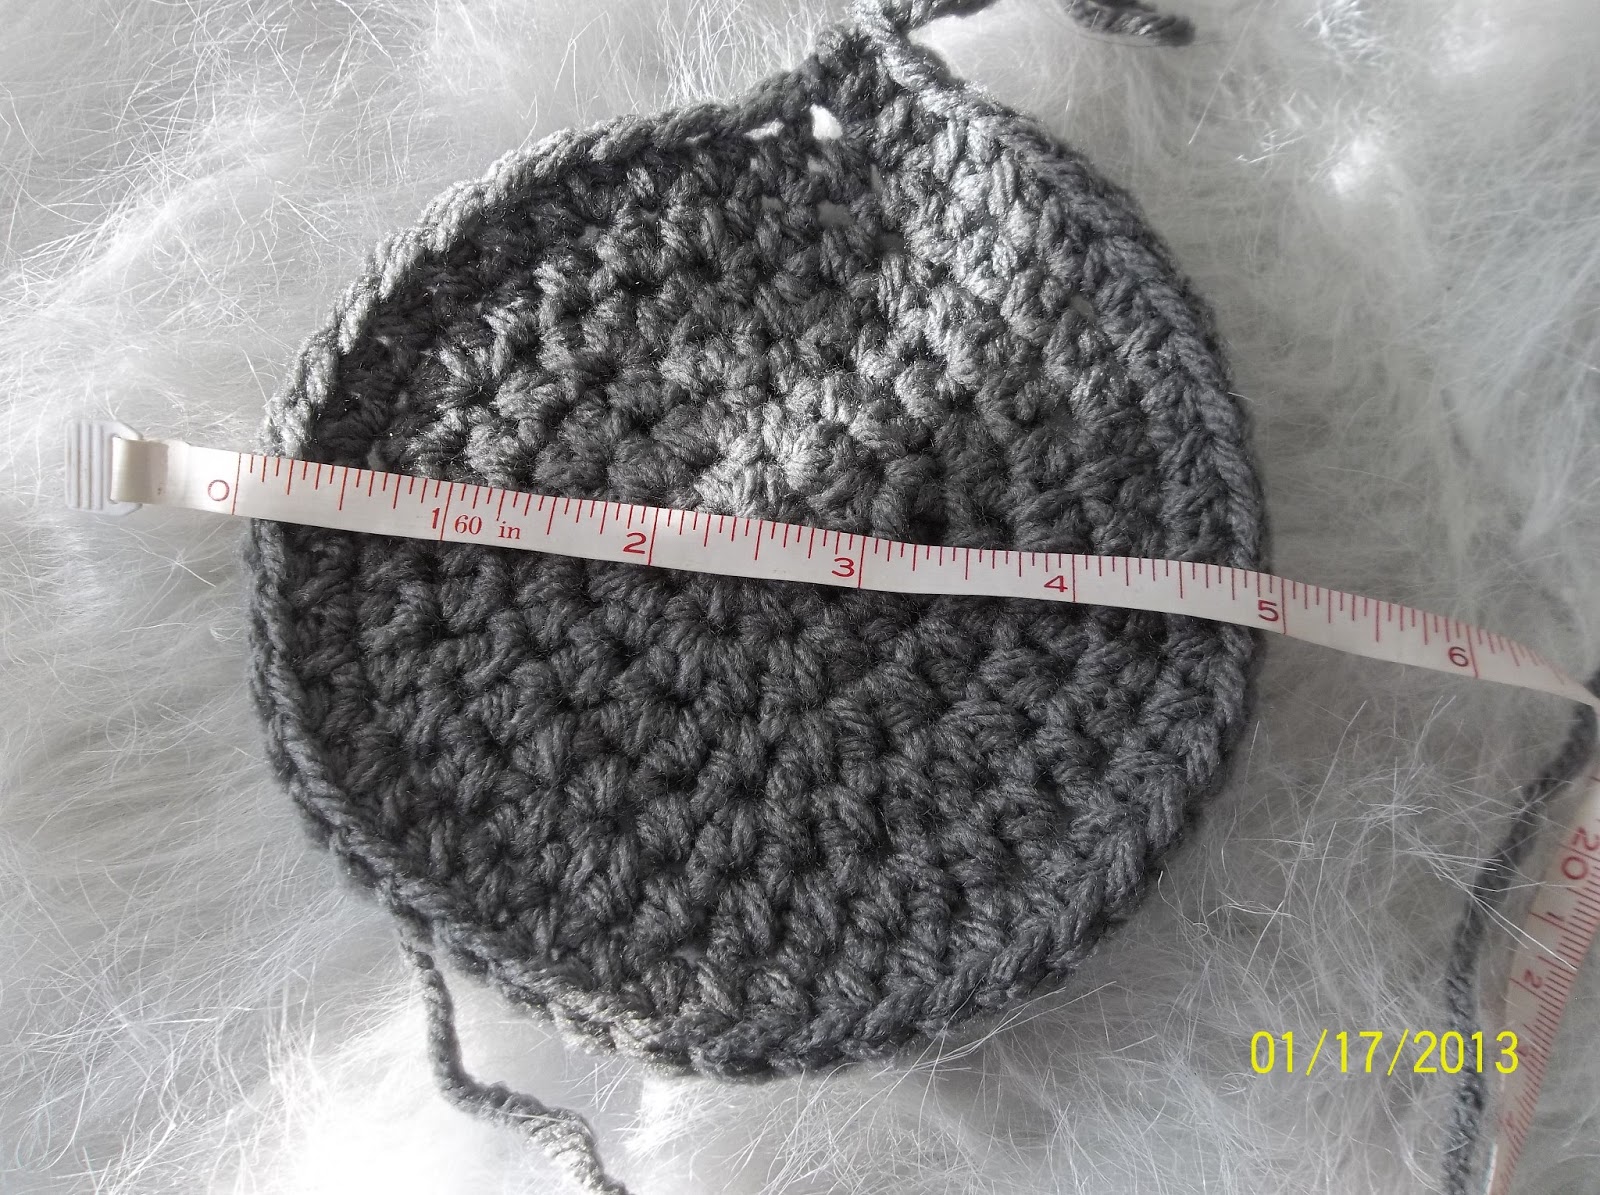 Creating Beautiful Things in Life: How to properly size crochet hats. Chart  for correct sizing, including Magic Circle Sizes.